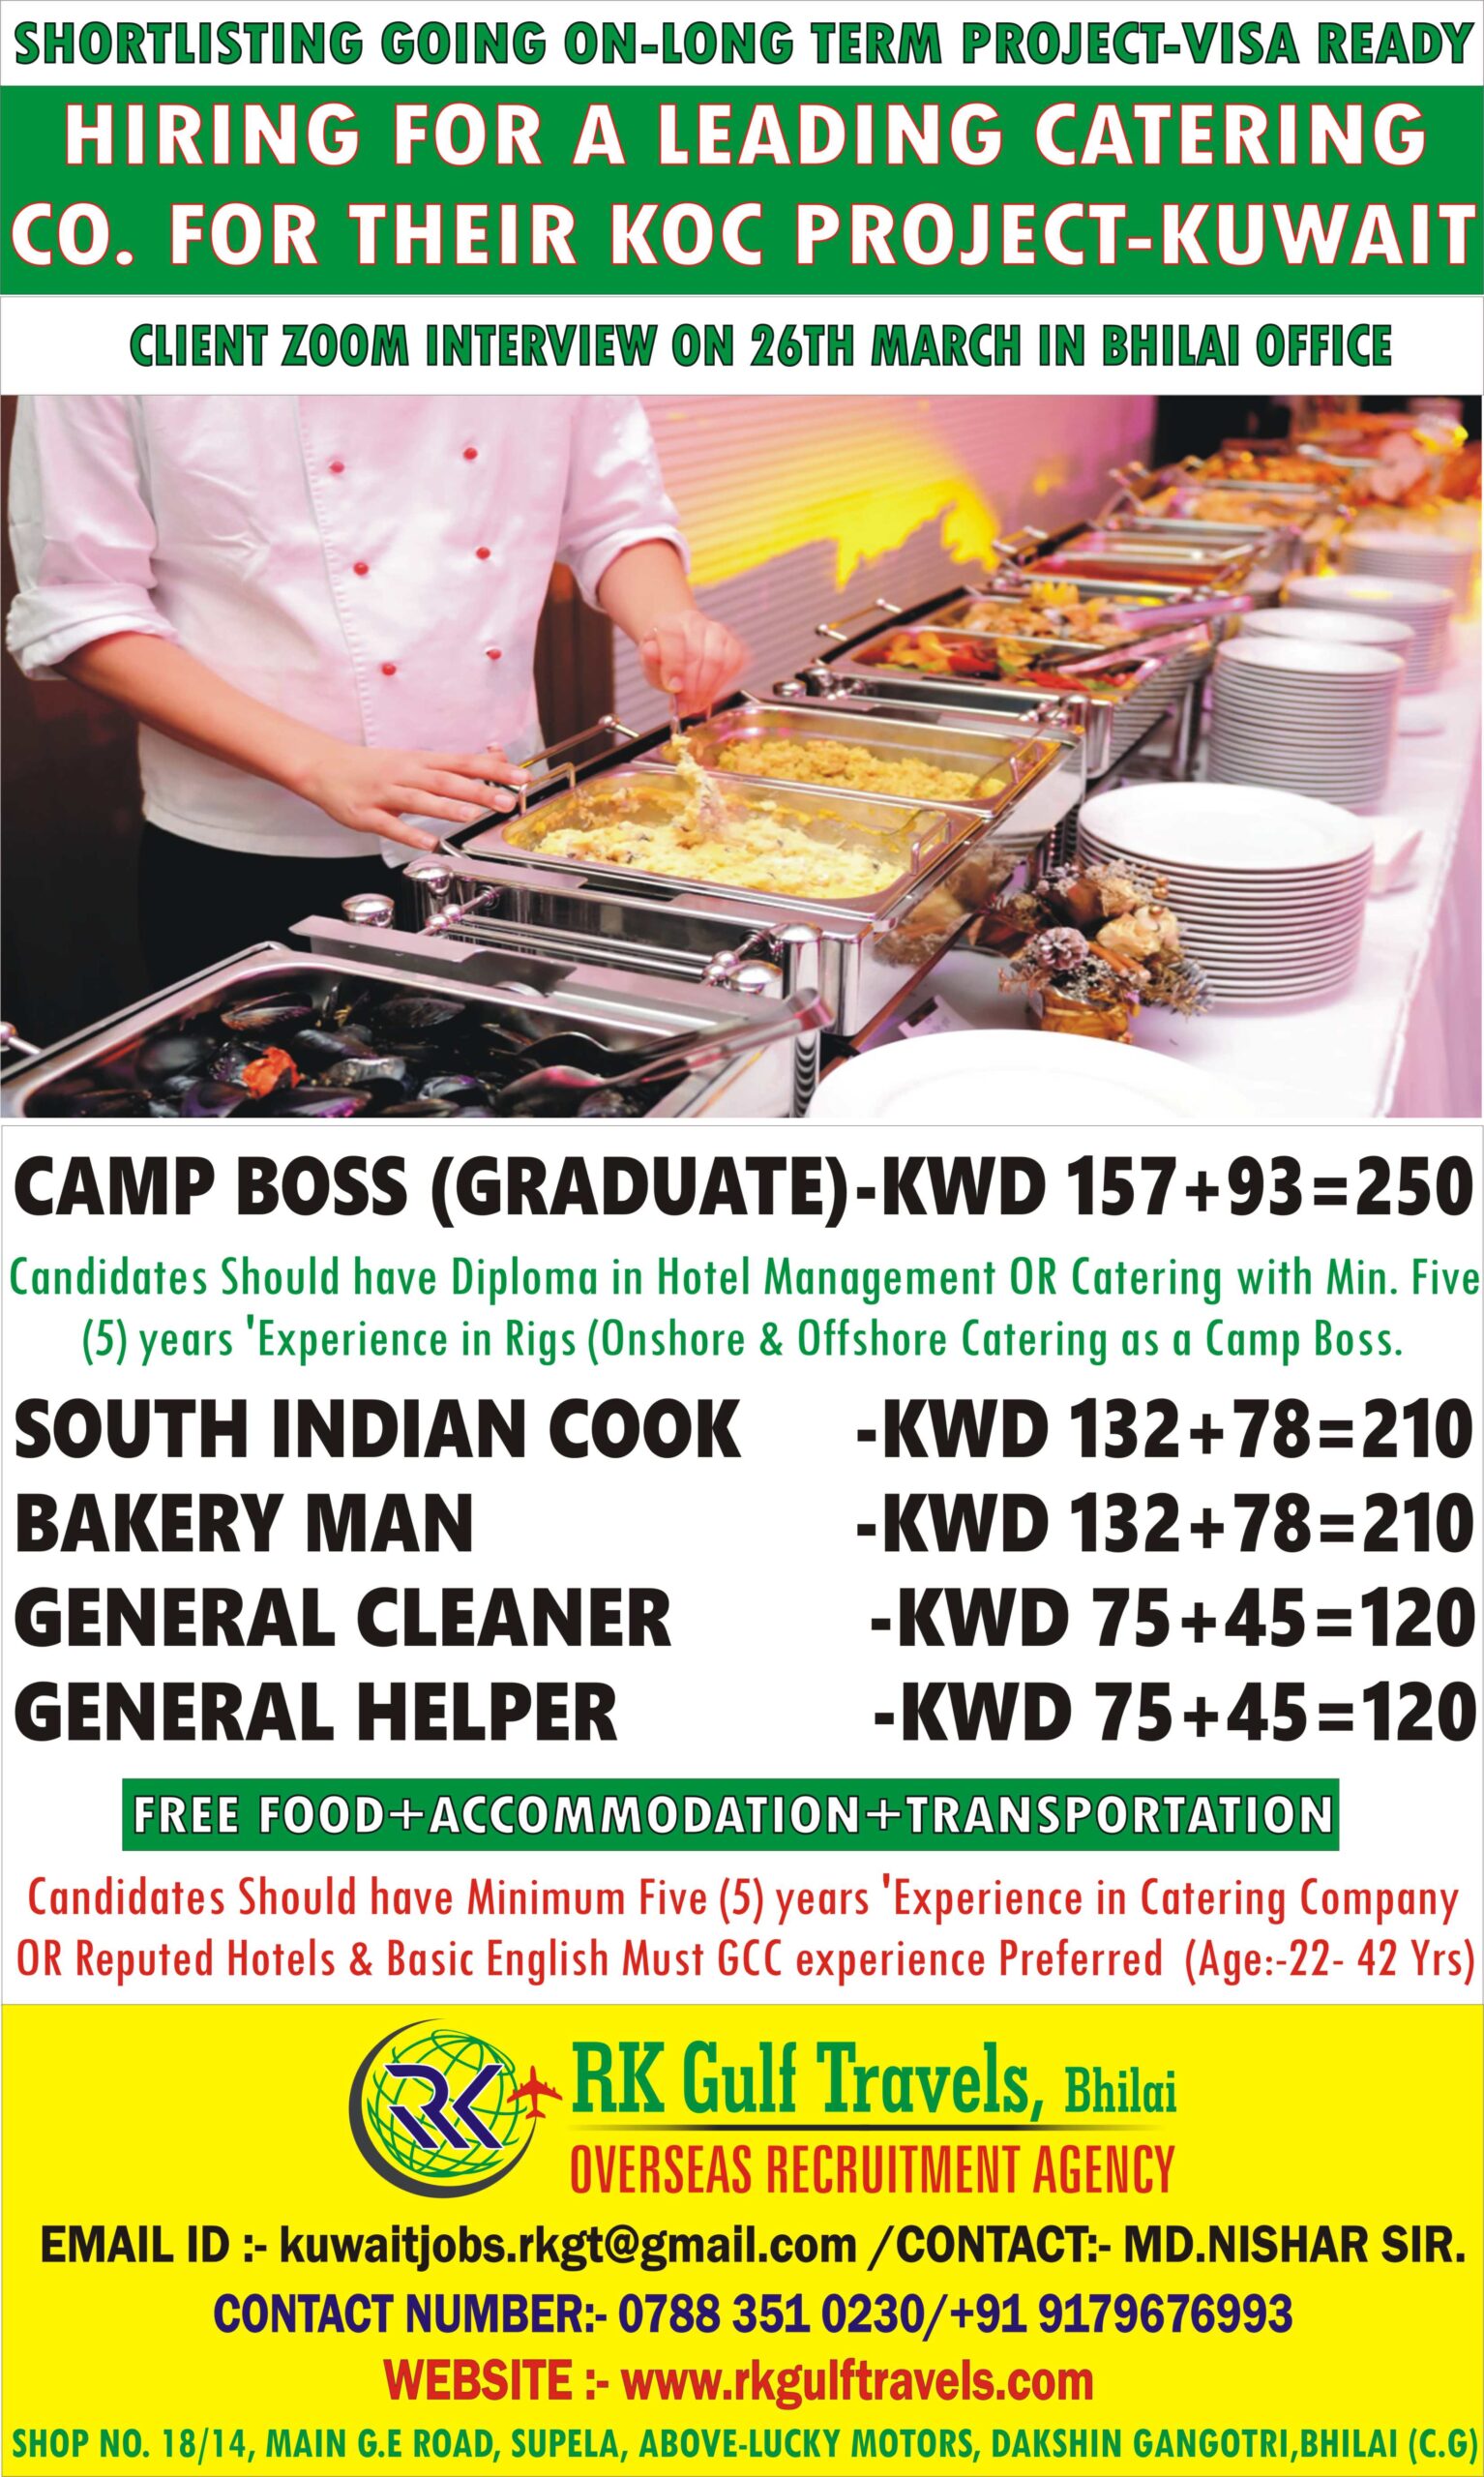 HIRING FOR A LEADING CATERING COMPANY – KUWAIT 